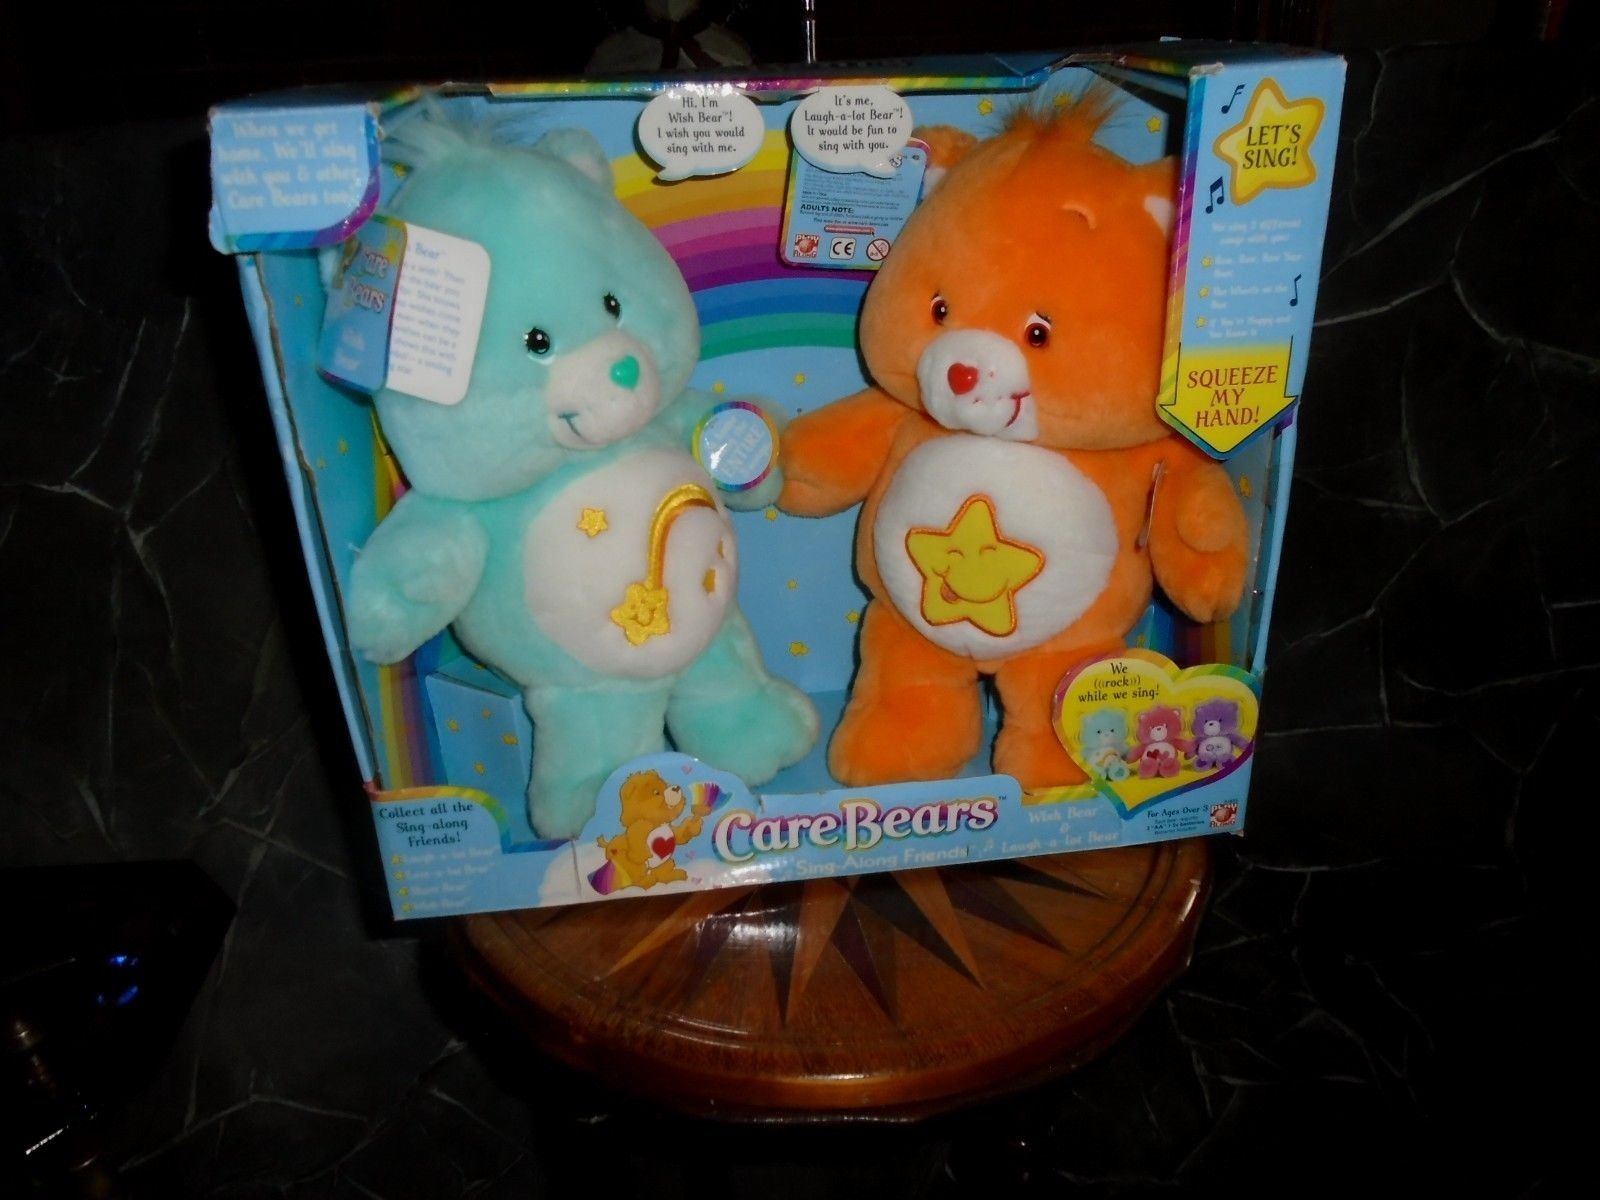 Care Bears Sing-along Friends , Wish, and Laugh-a-lot in box